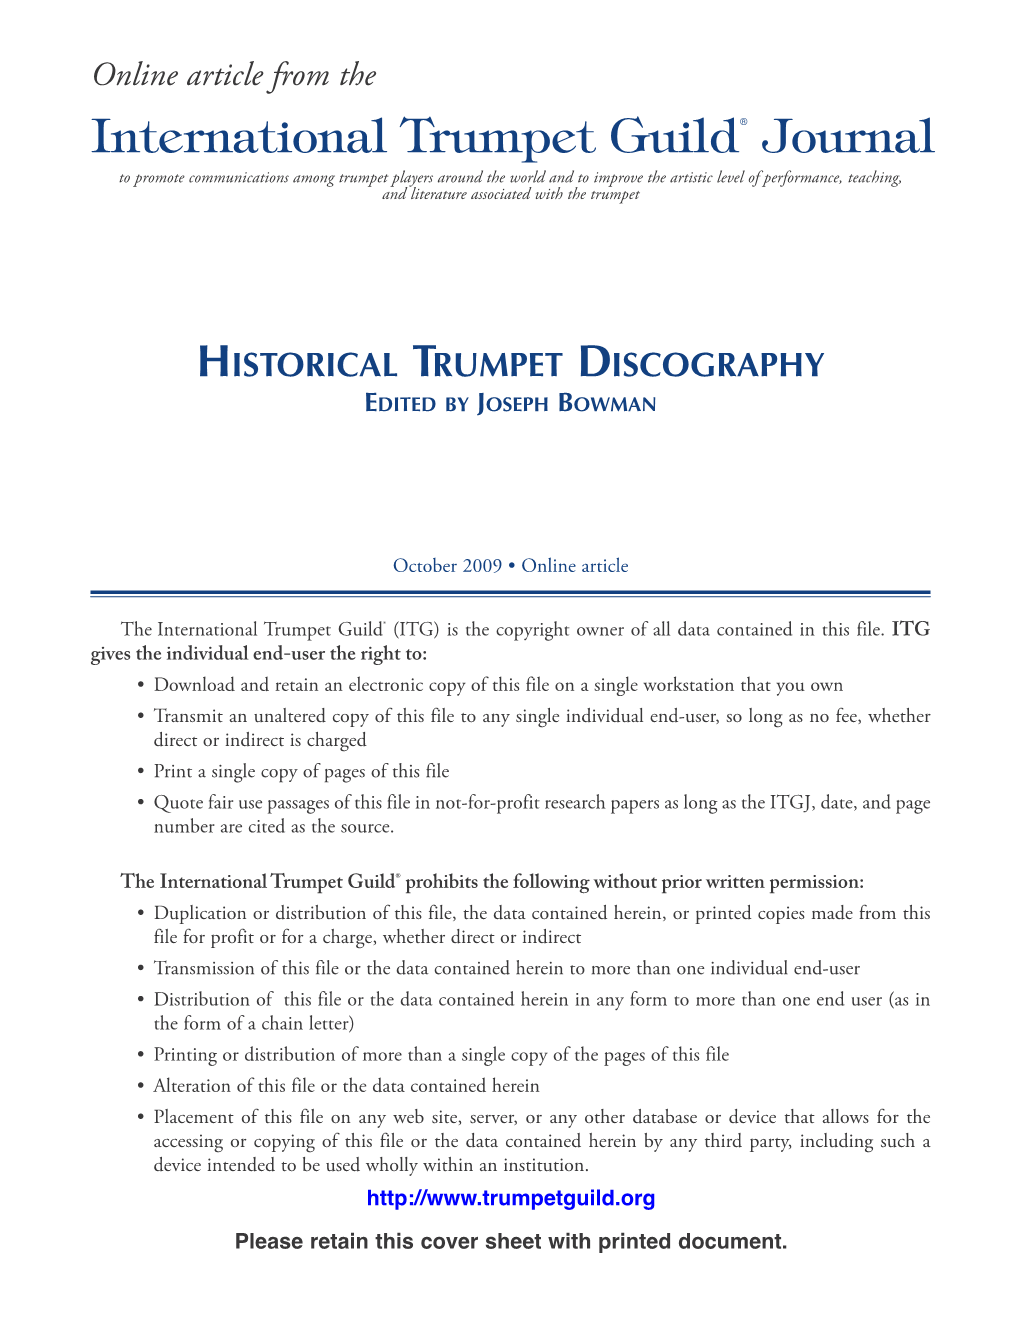 Historical Trumpet Discography Is a Continuation of Asst